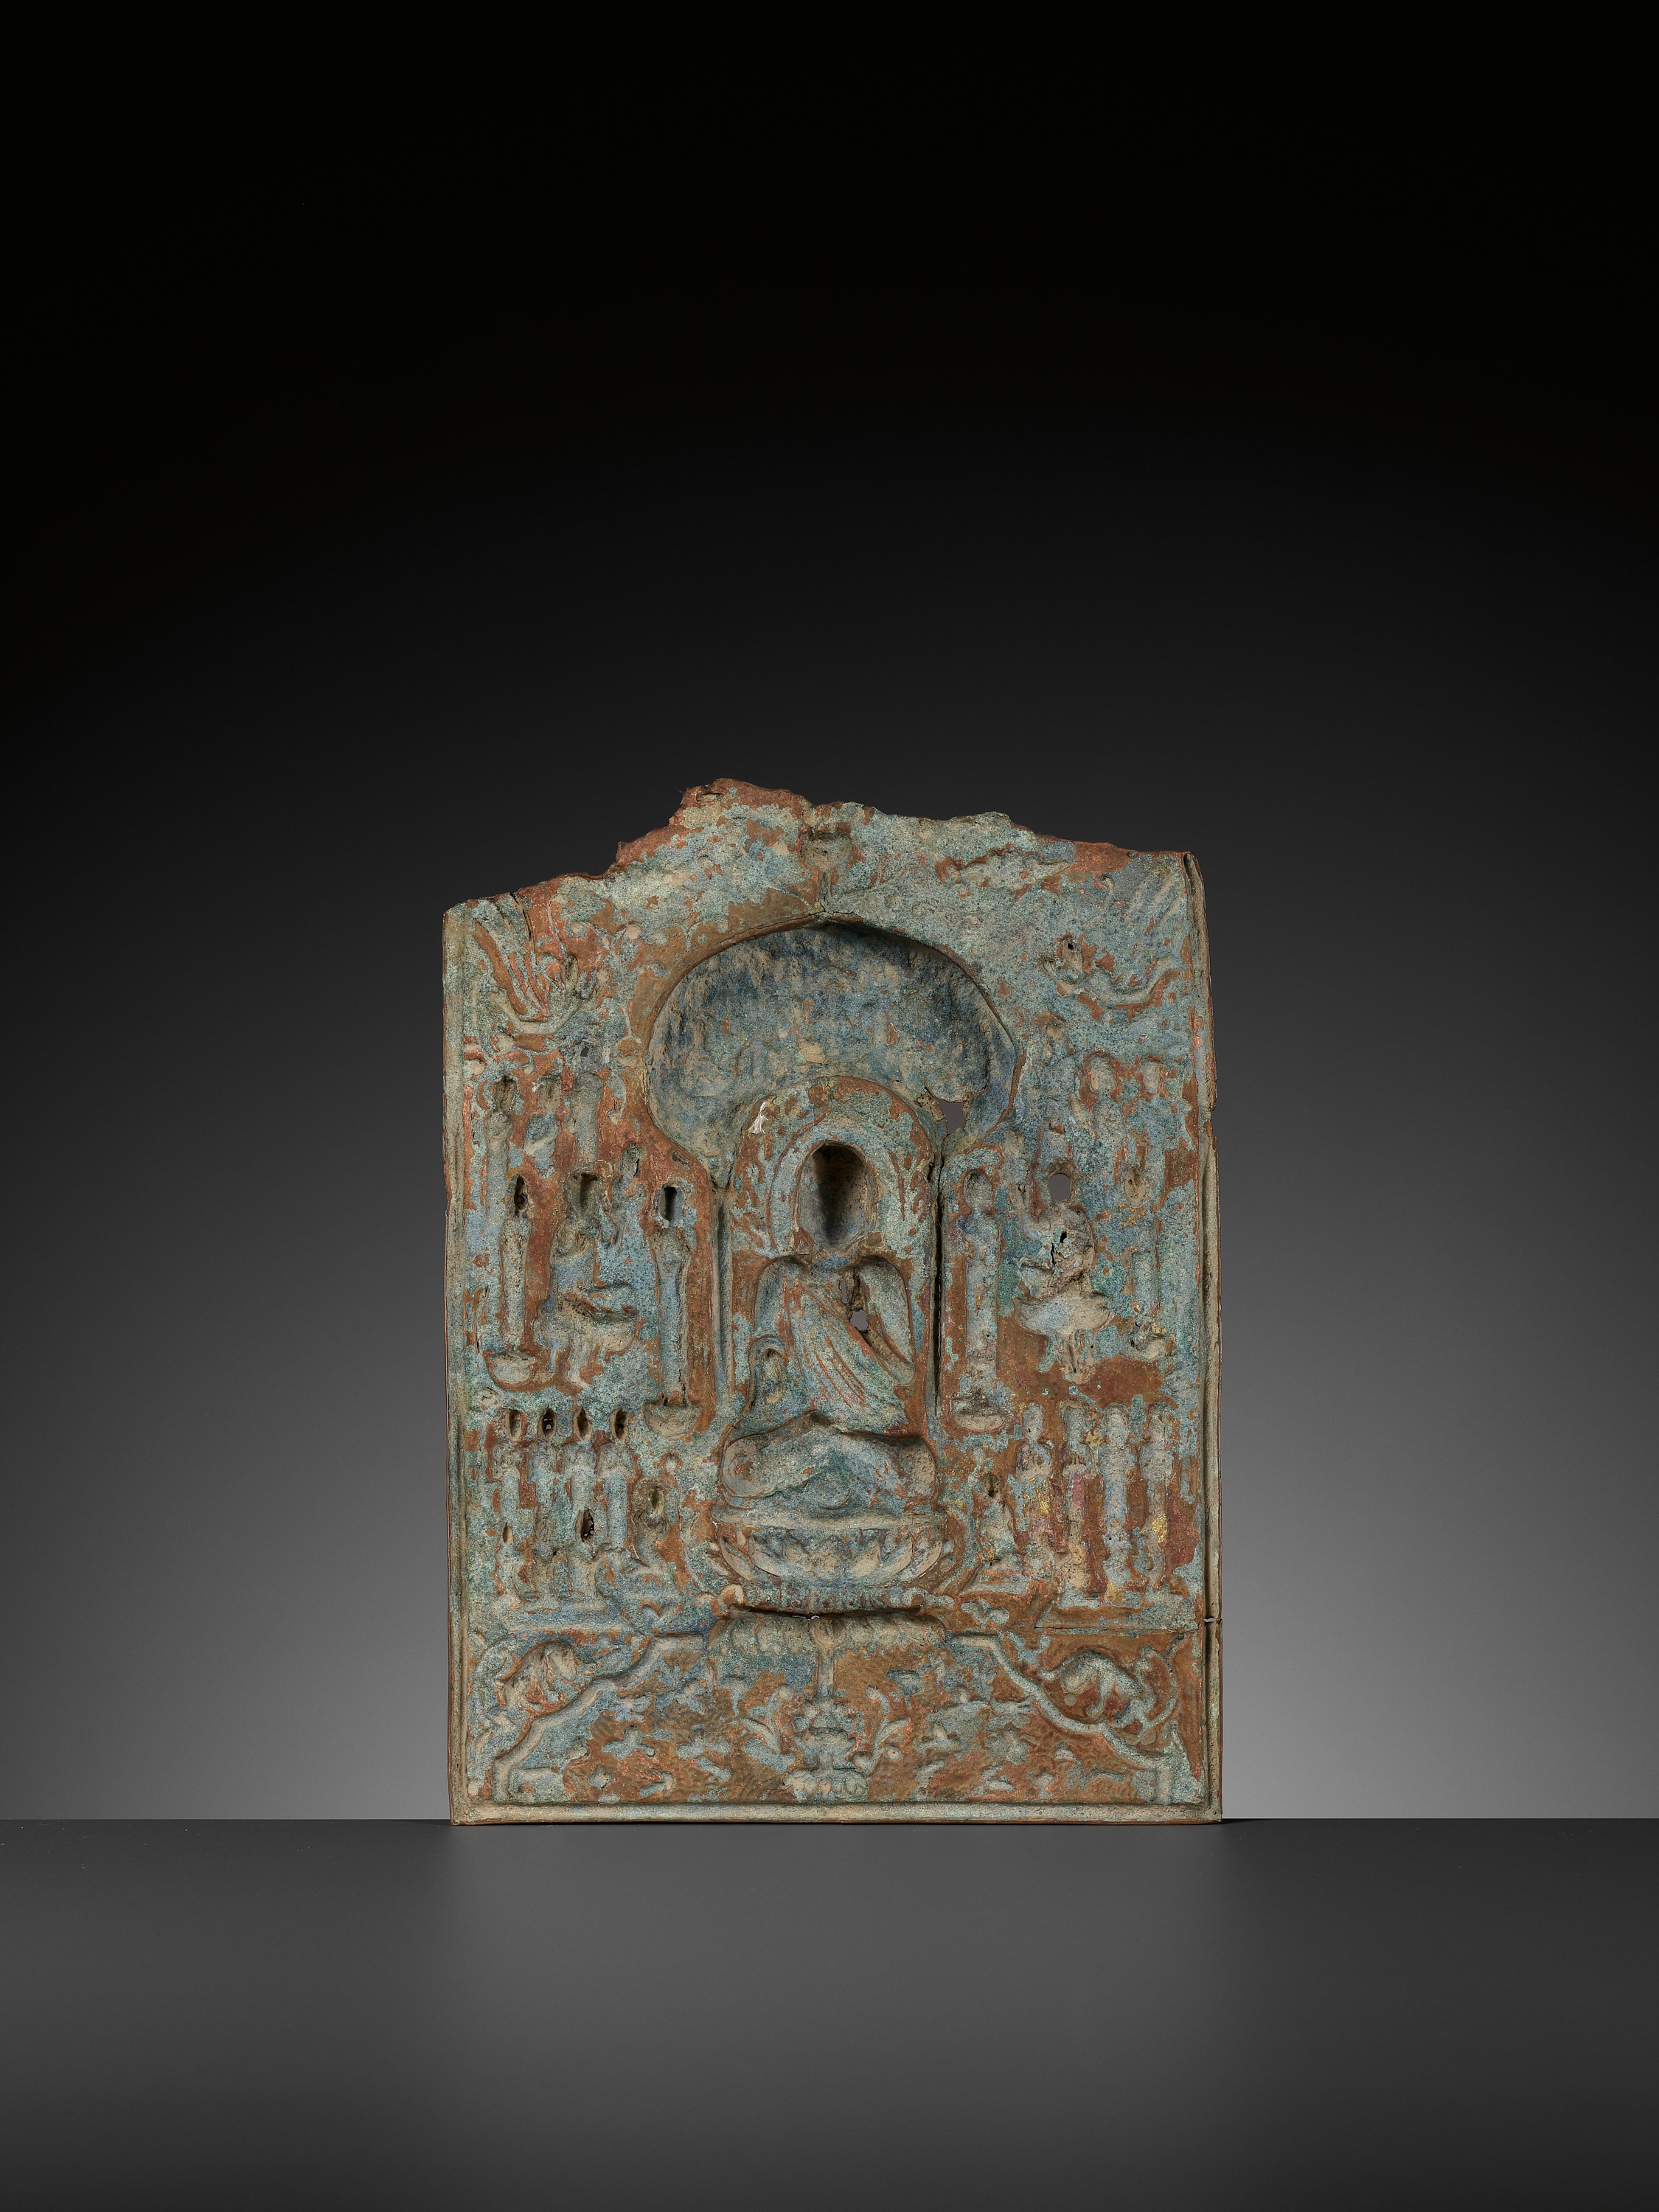 A LARGE AND IMPORTANT BUDDHIST VOTIVE PLAQUE, GILT COPPER REPOUSSE, EARLY TANG DYNASTY - Image 5 of 21